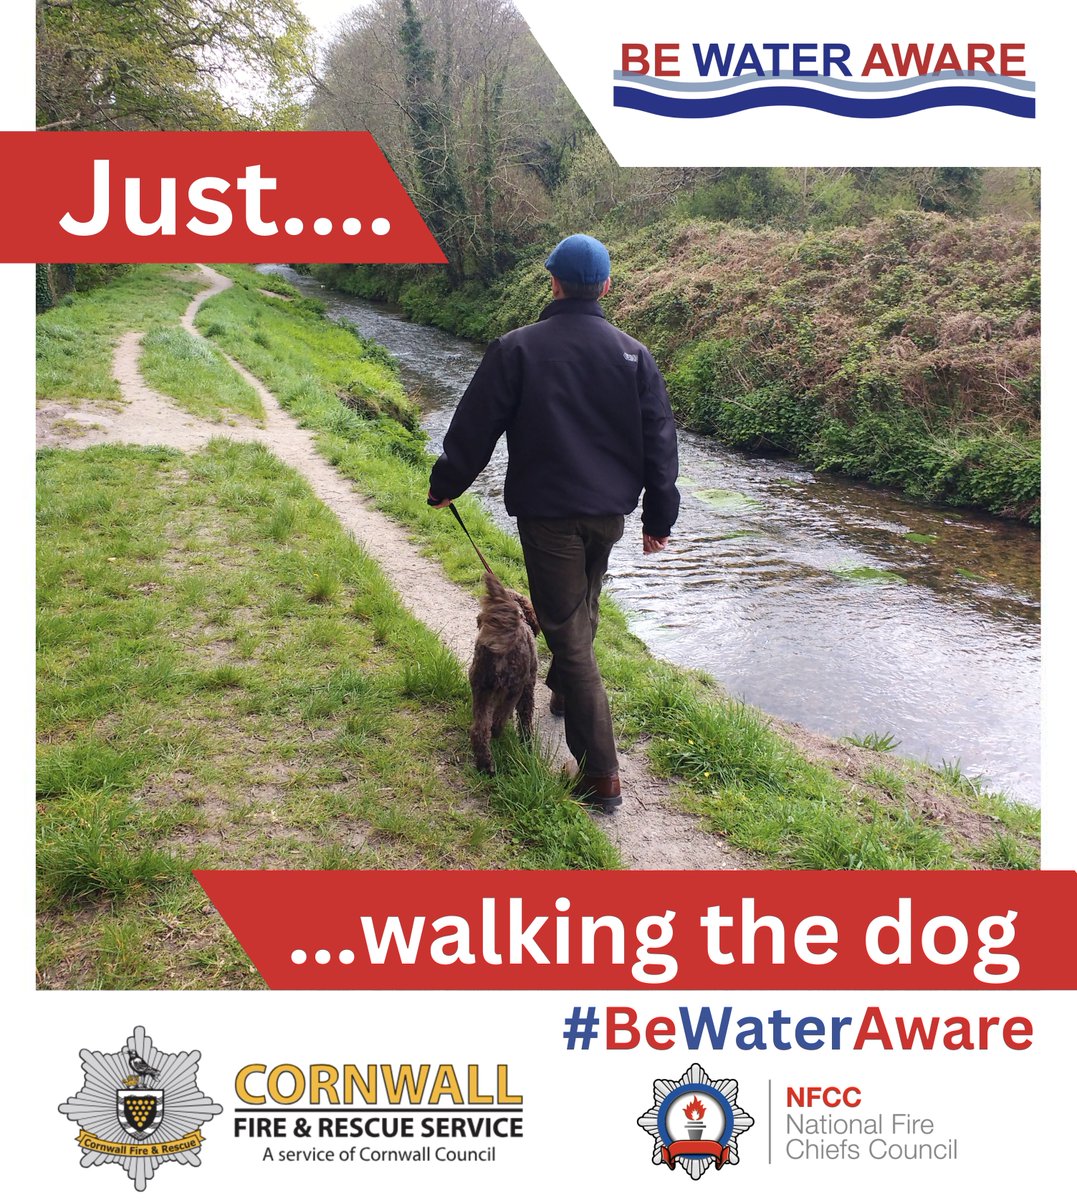 🐶Never enter the water to rescue your dog...who will rescue you?
👉40% of people that accidentally drown had no intention of entering the water.
This week we support the @NFCC drowning prevention campaign

👍#BeWaterAware